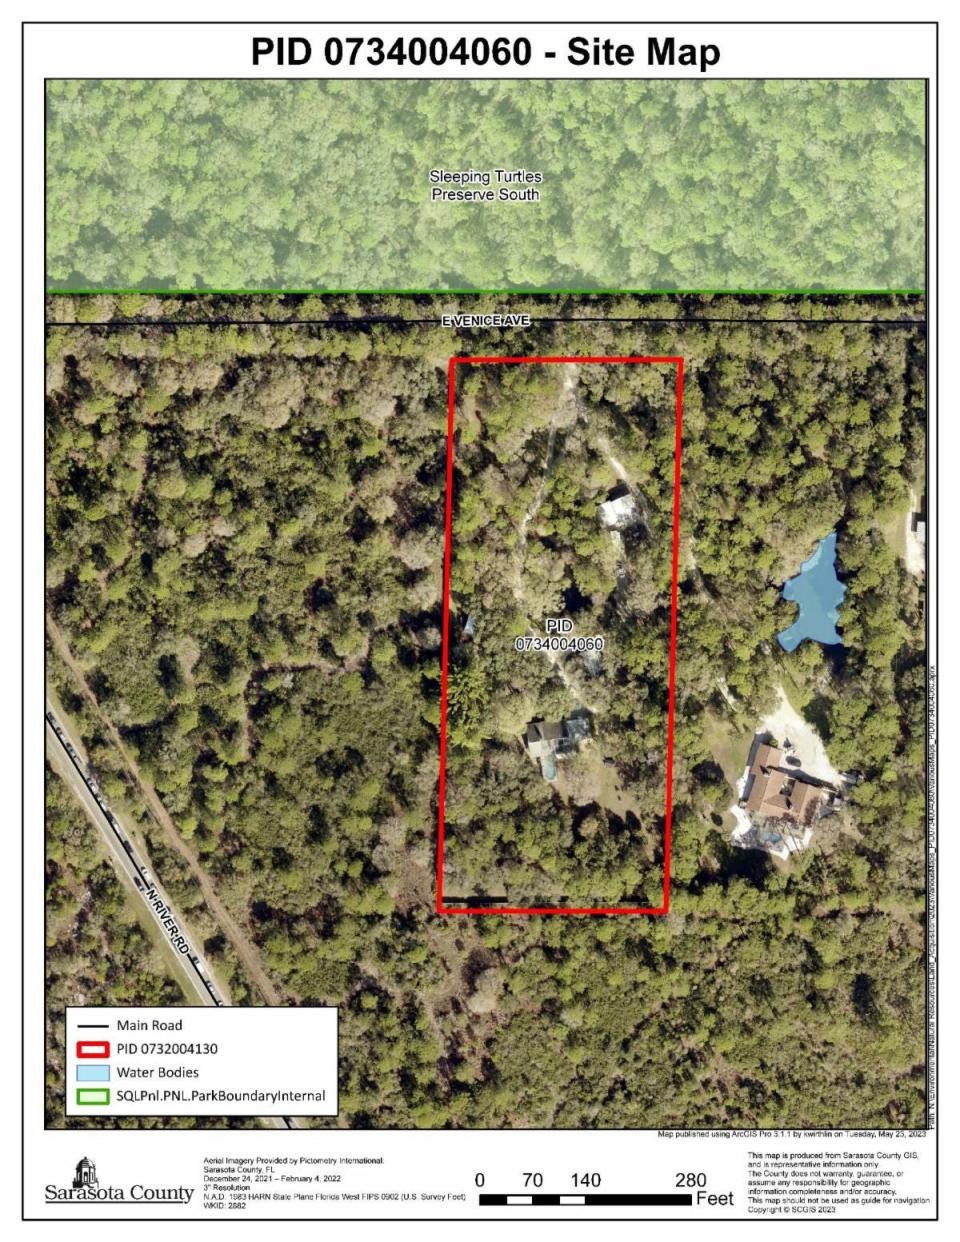 This map shows a five-acre site that purchased by Sarasota County from the Rebecca Lee Morgan Revocable Living Trust.